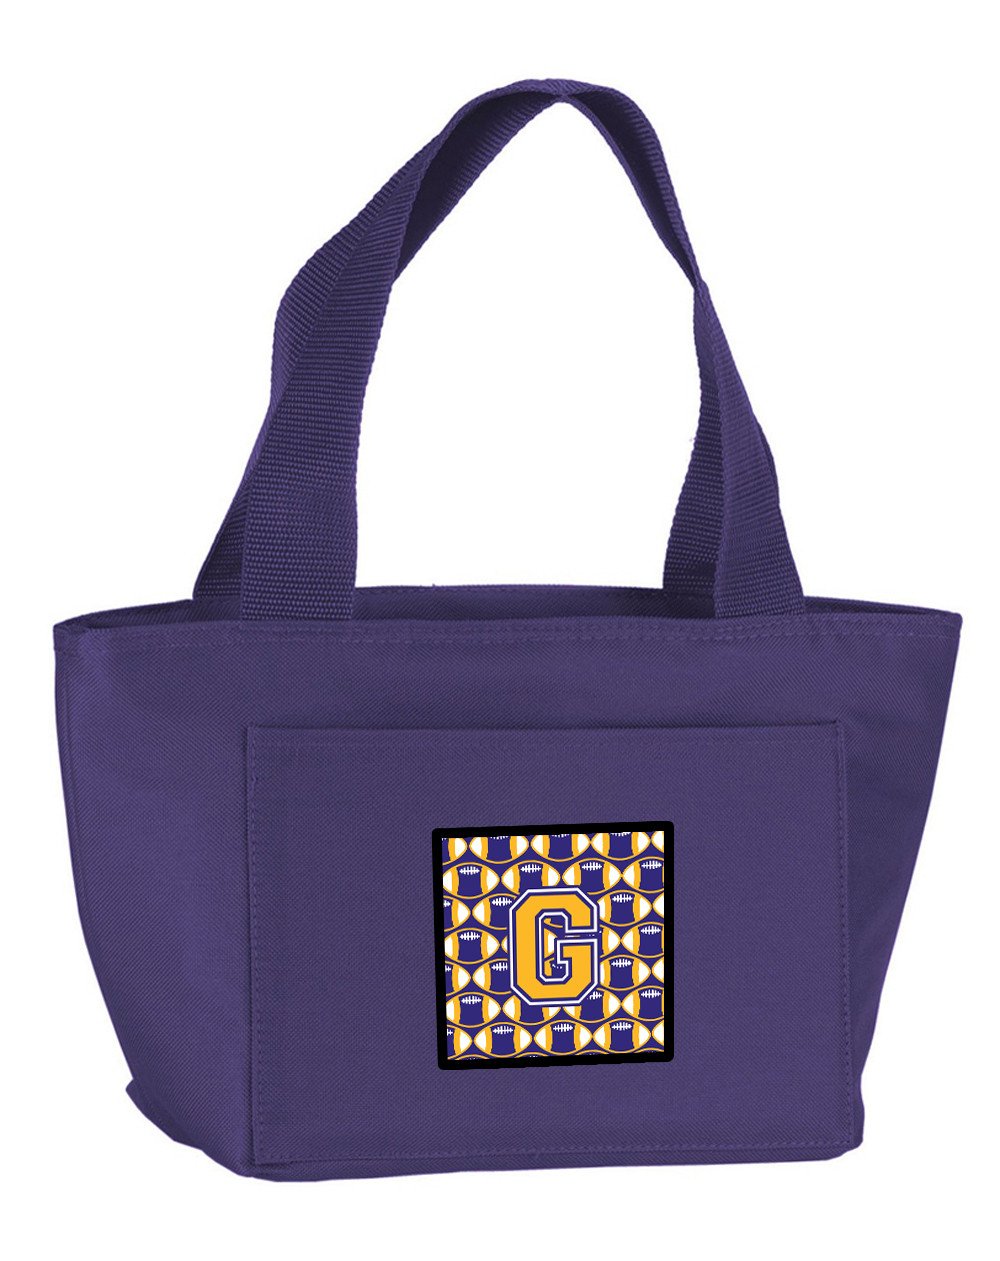 Letter G Football Purple and Gold Lunch Bag CJ1064-GPR-8808 by Caroline's Treasures